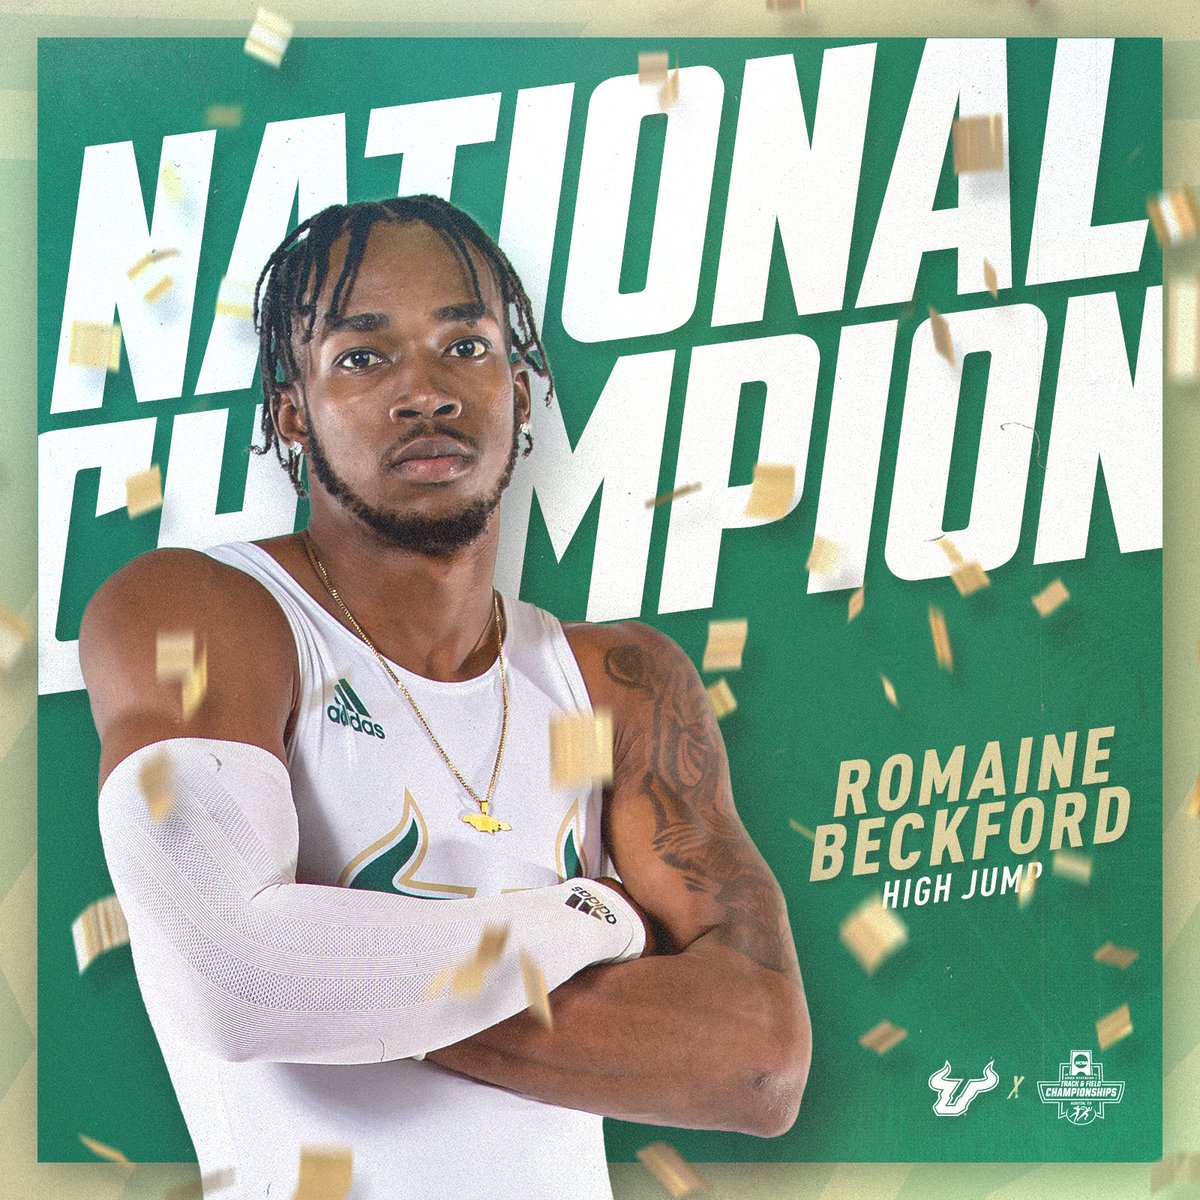 🏆 𝐍𝐀𝐓𝐈𝐎𝐍𝐀𝐋. 𝐂𝐇𝐀𝐌𝐏𝐈𝐎𝐍. 🏆

Romaine Beckford is the men's high jump national champion with a new program record leap of 2.27m (7-5.25)‼️‼️😎

#HornsUp🤘 | #NCAATF